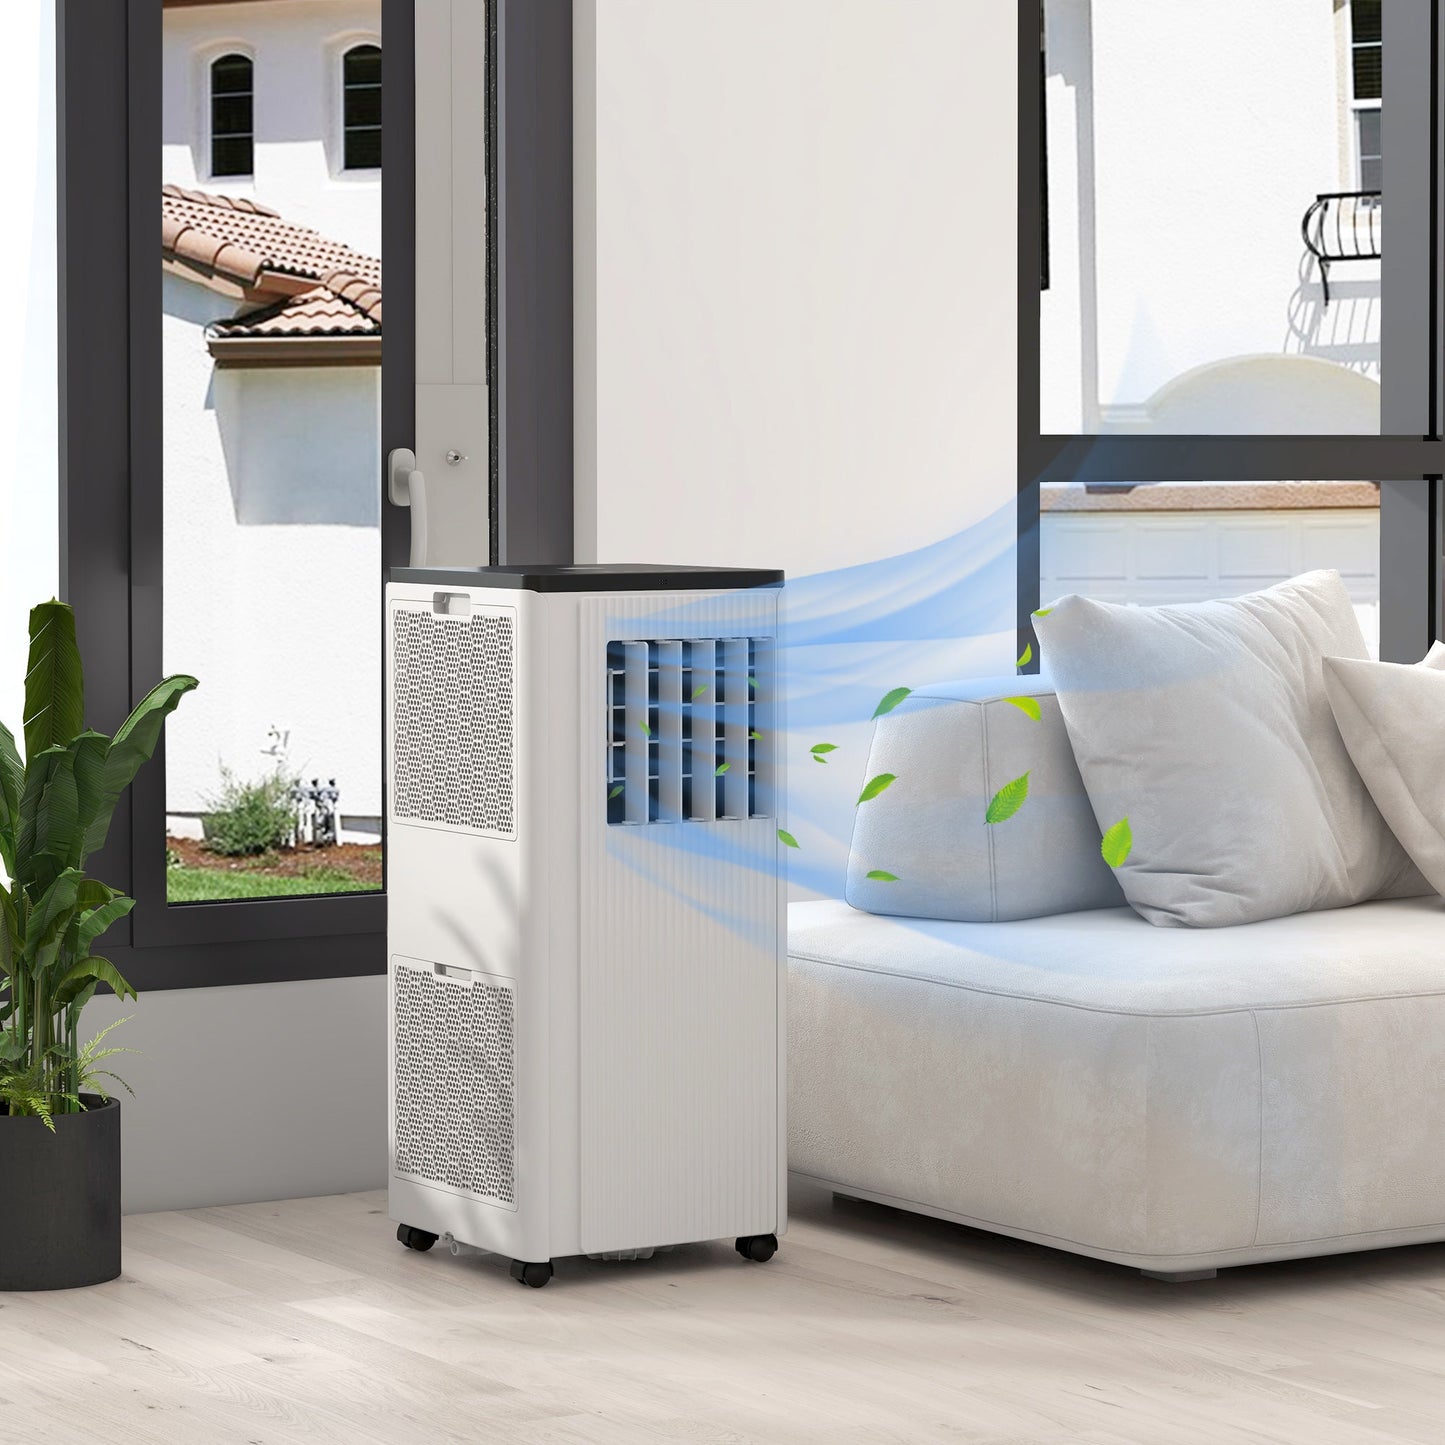 HOMCOM Smart WiFi Air Conditioner: 7000 BTU Cooling for 15m² Rooms, Dehumidifier & Fan Functions, 24-Hour Timer, White